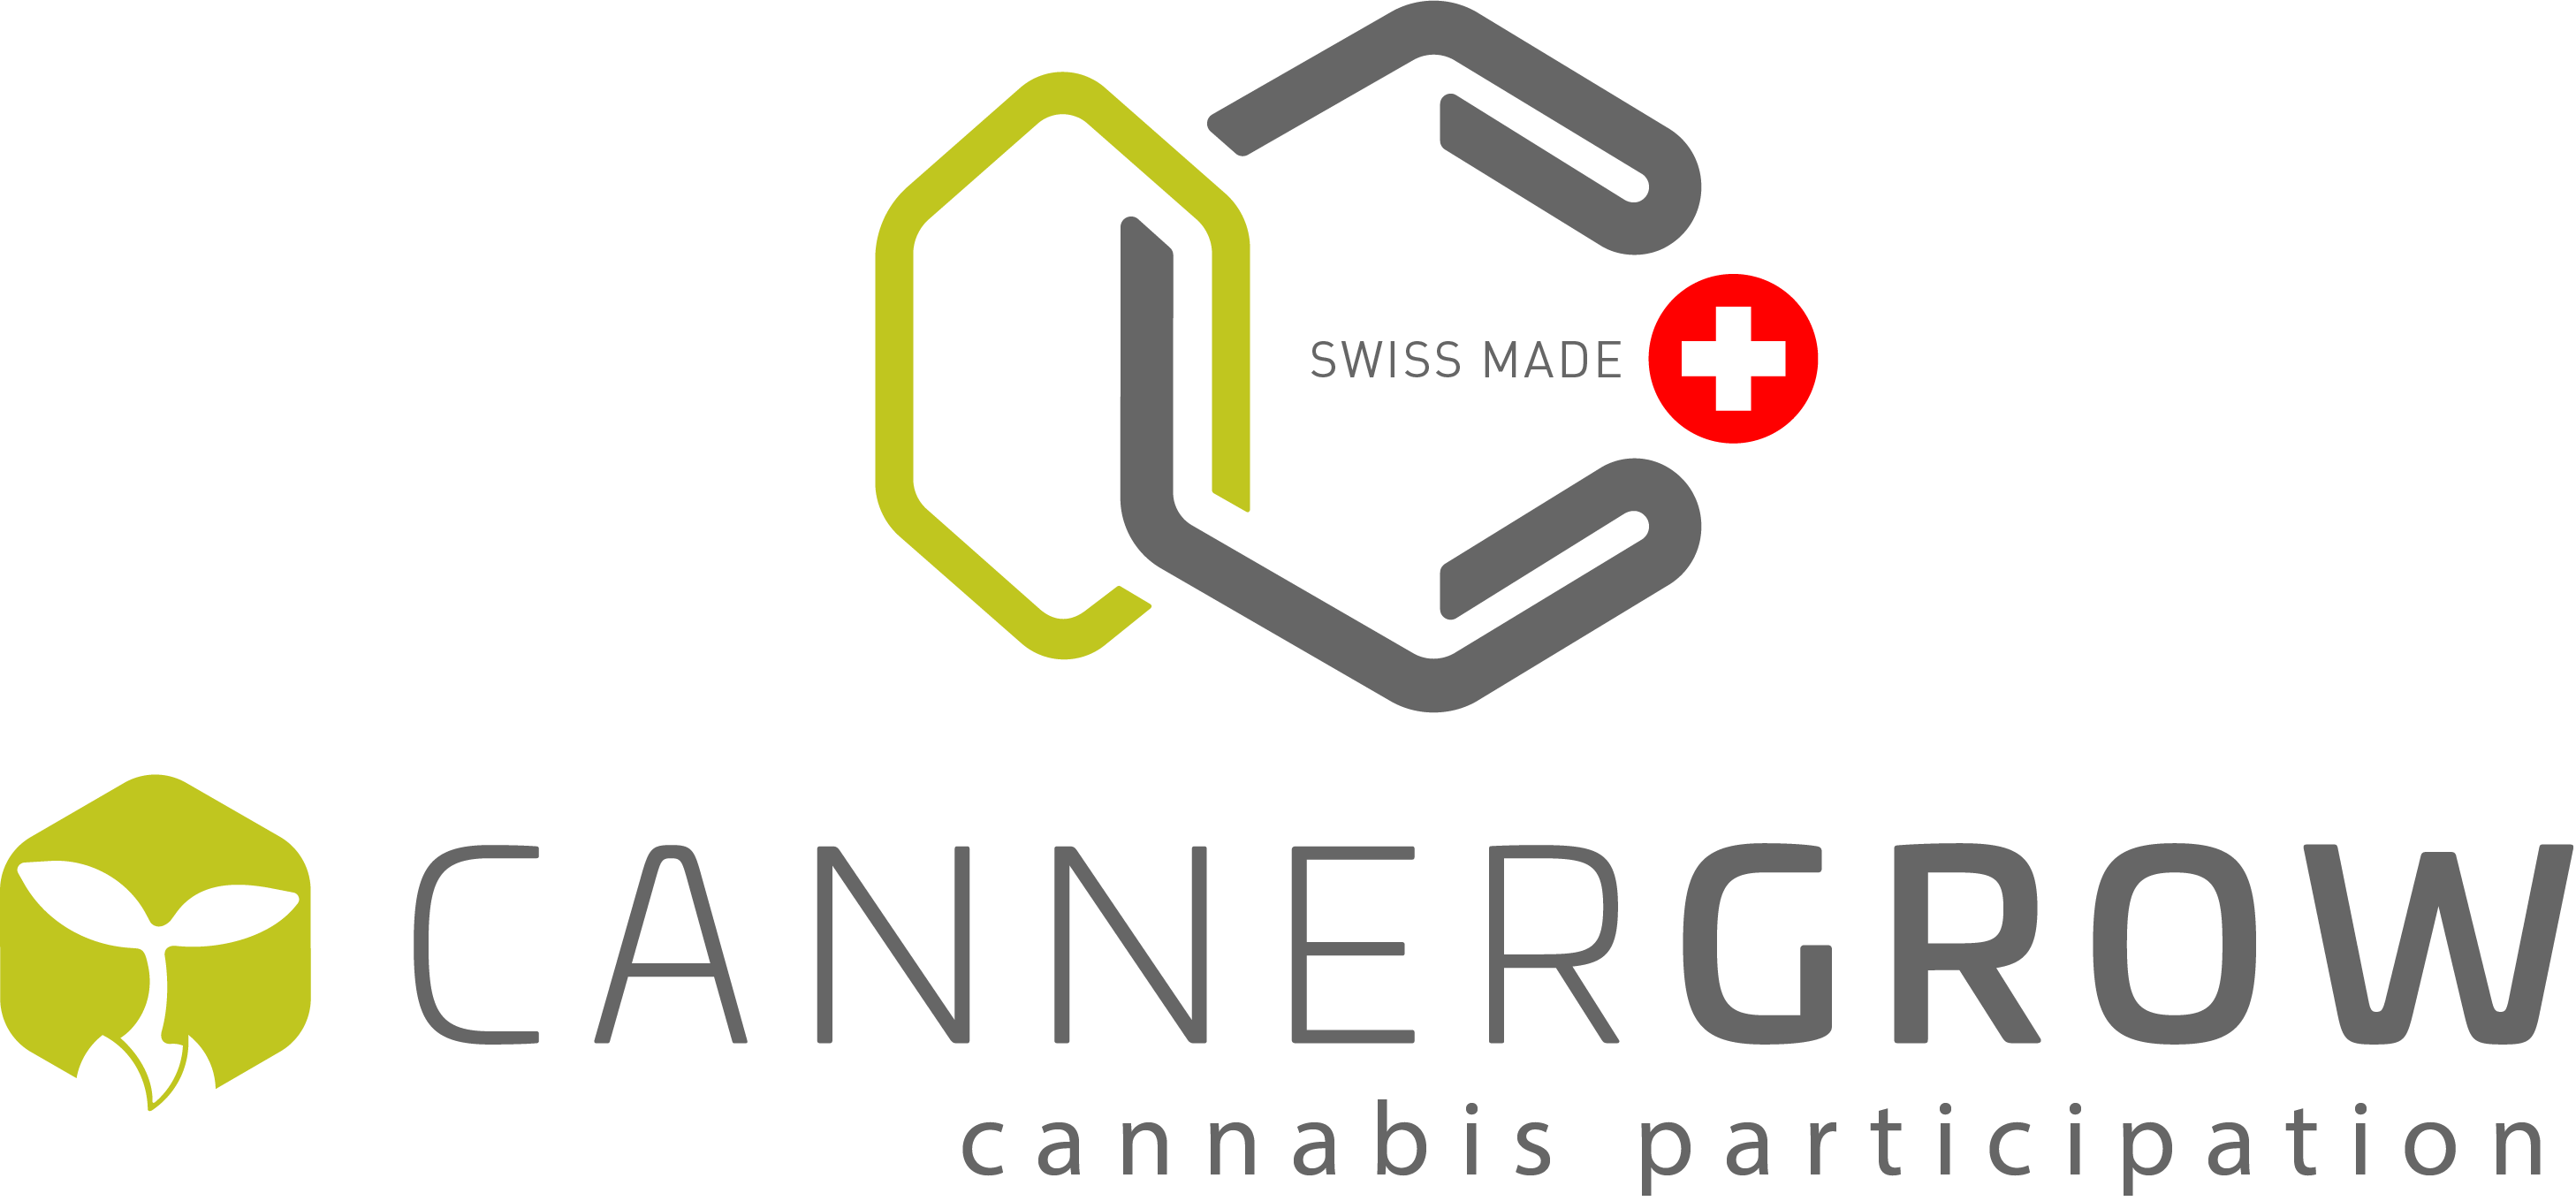 Logo der Cannergrow by Cannerald GmbH